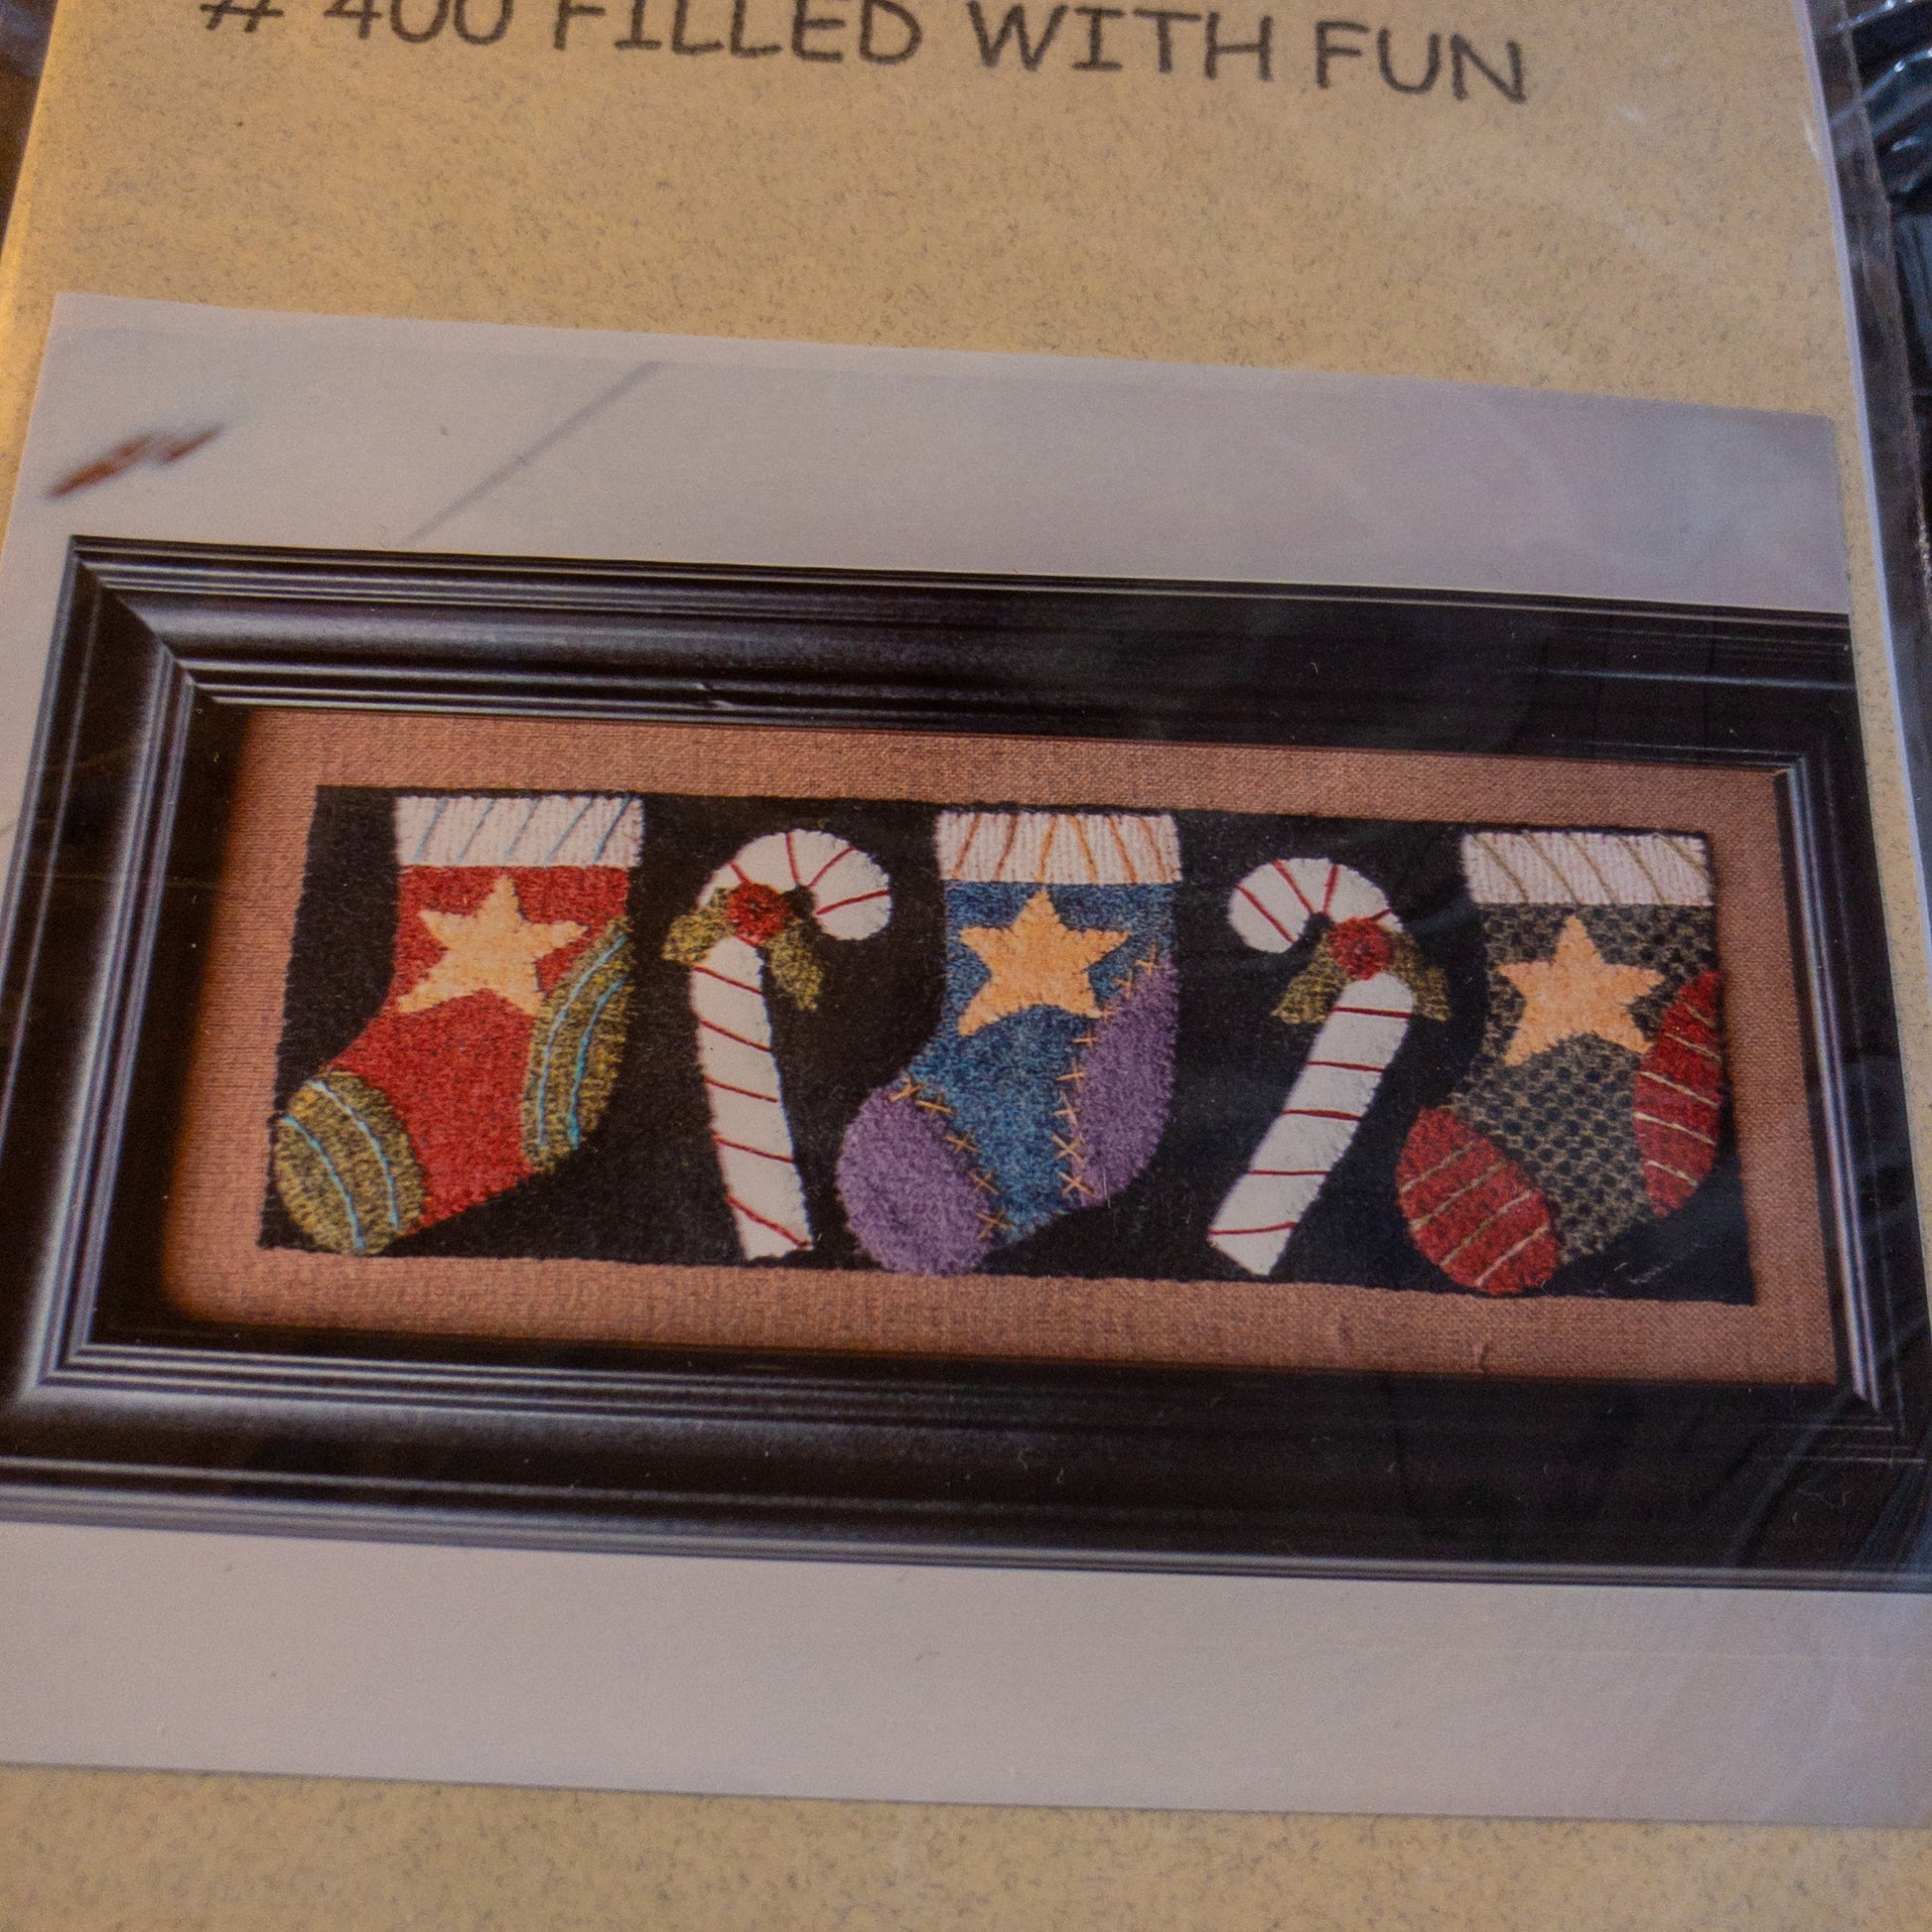 Little Bits of Joan, Filled with Fun, Felt Kit, with nice Frame included